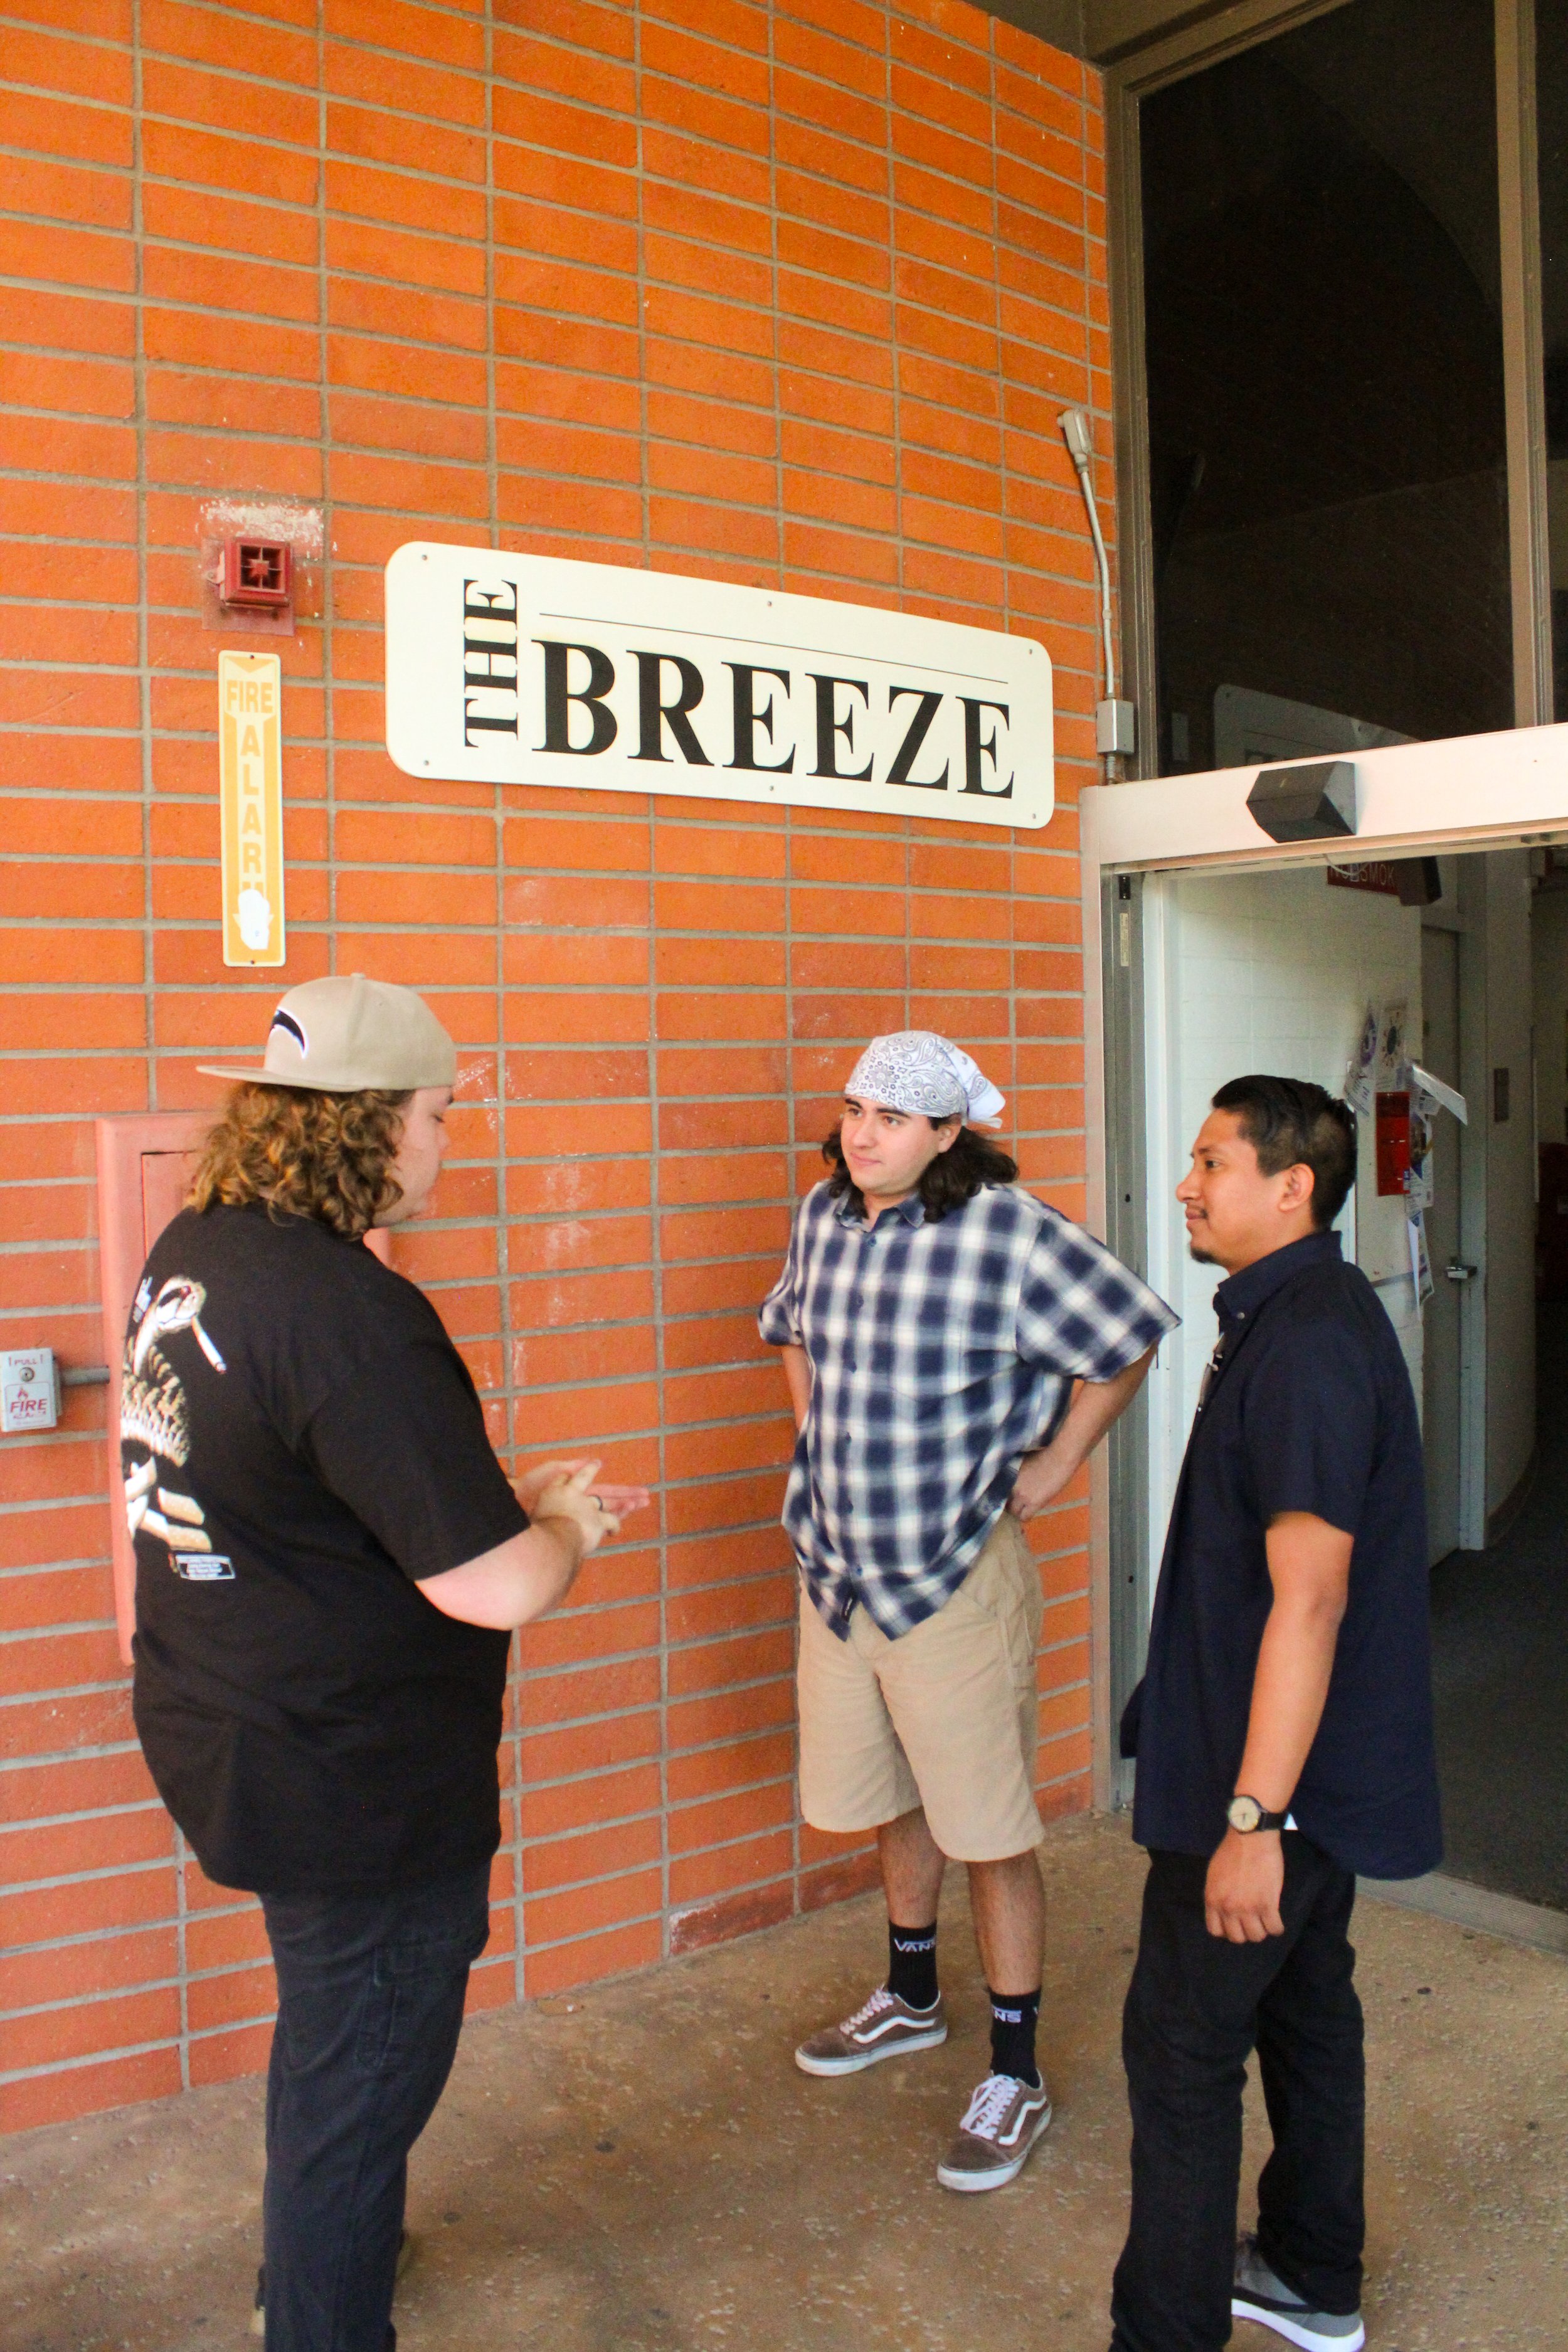 (From left to right) Nate, Paul, and Ed outside of The Breeze.